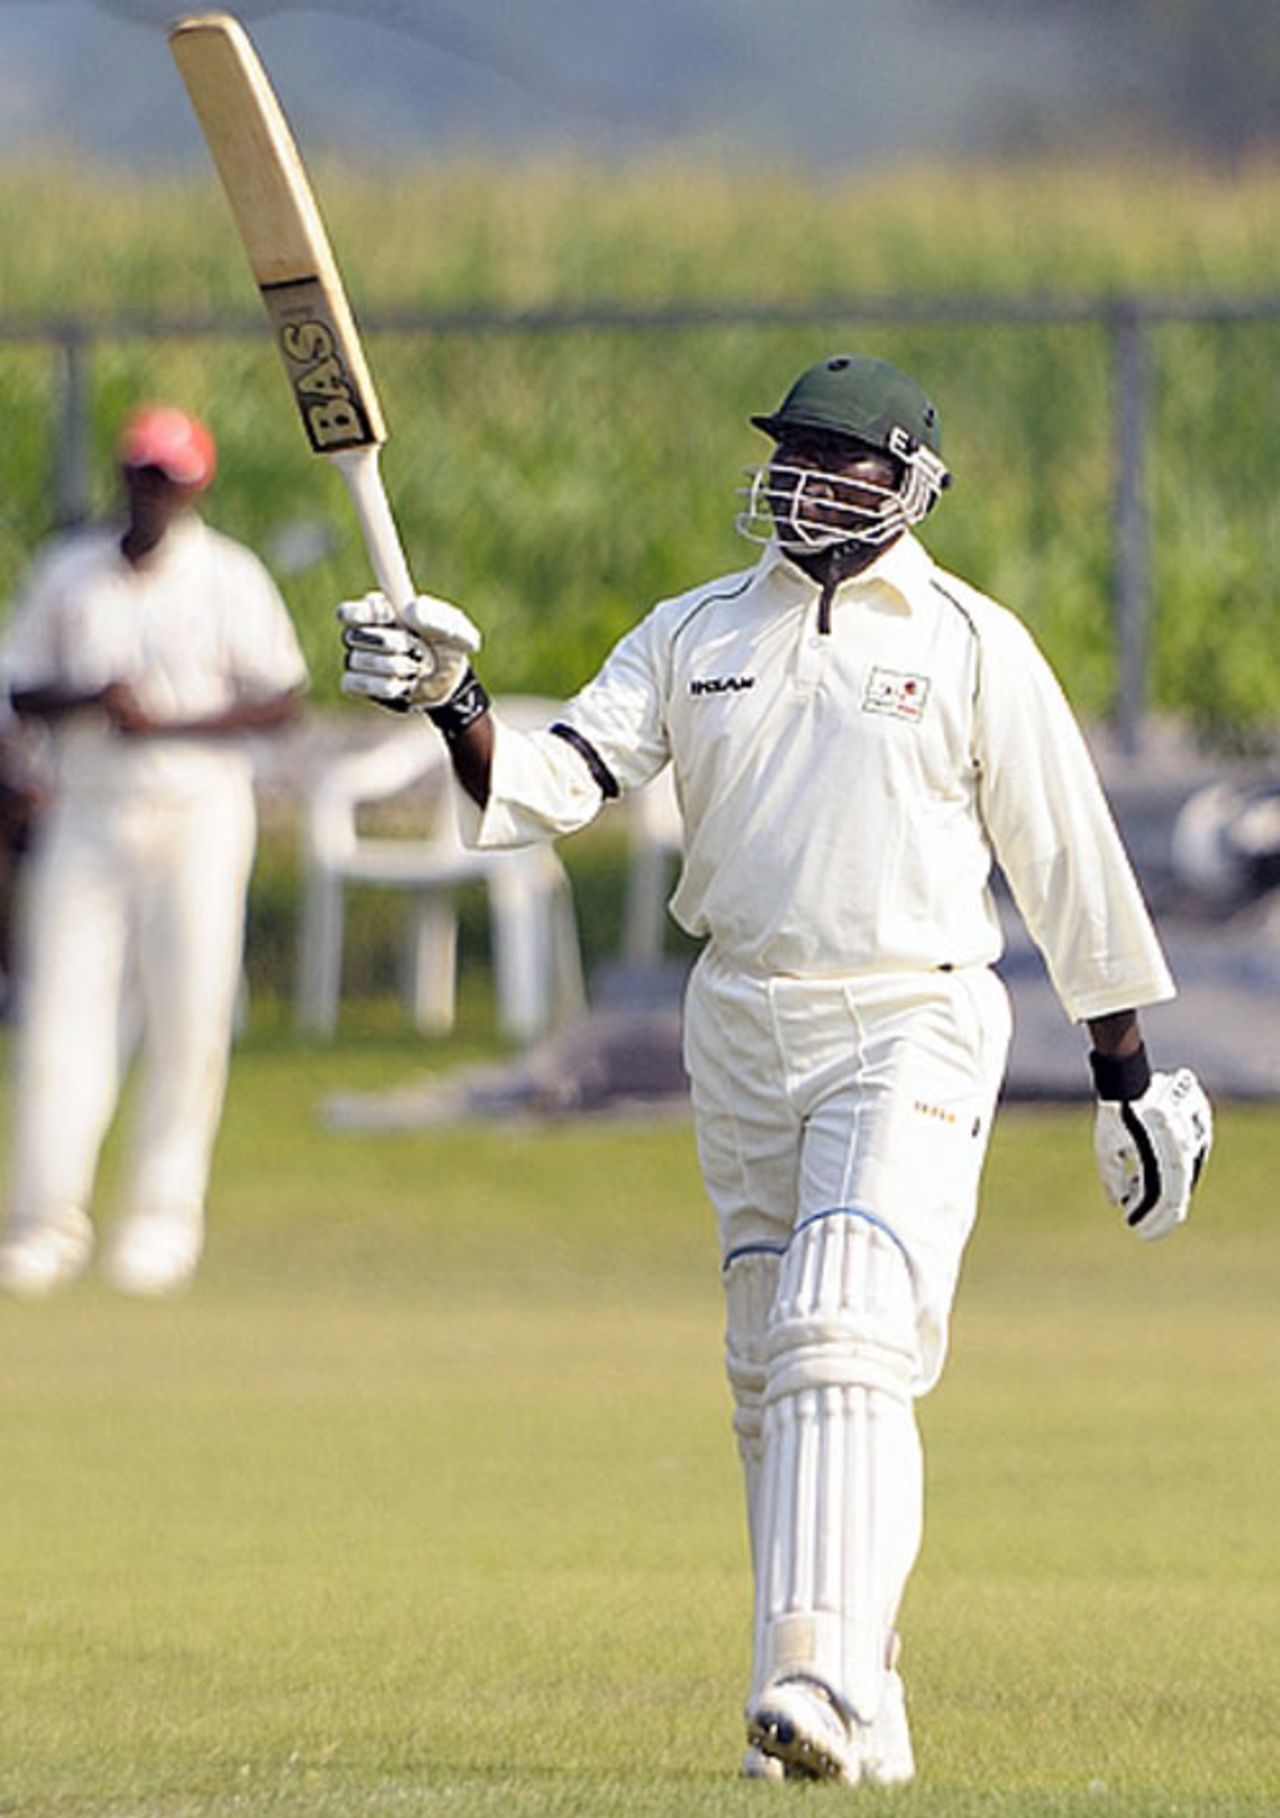 Steve Tikolo raises his bat after his 11th first-class century and second of the match, Canada v Kenya, ICC Intercontinental Cup, King City, 3rd day, August 16, 2009 